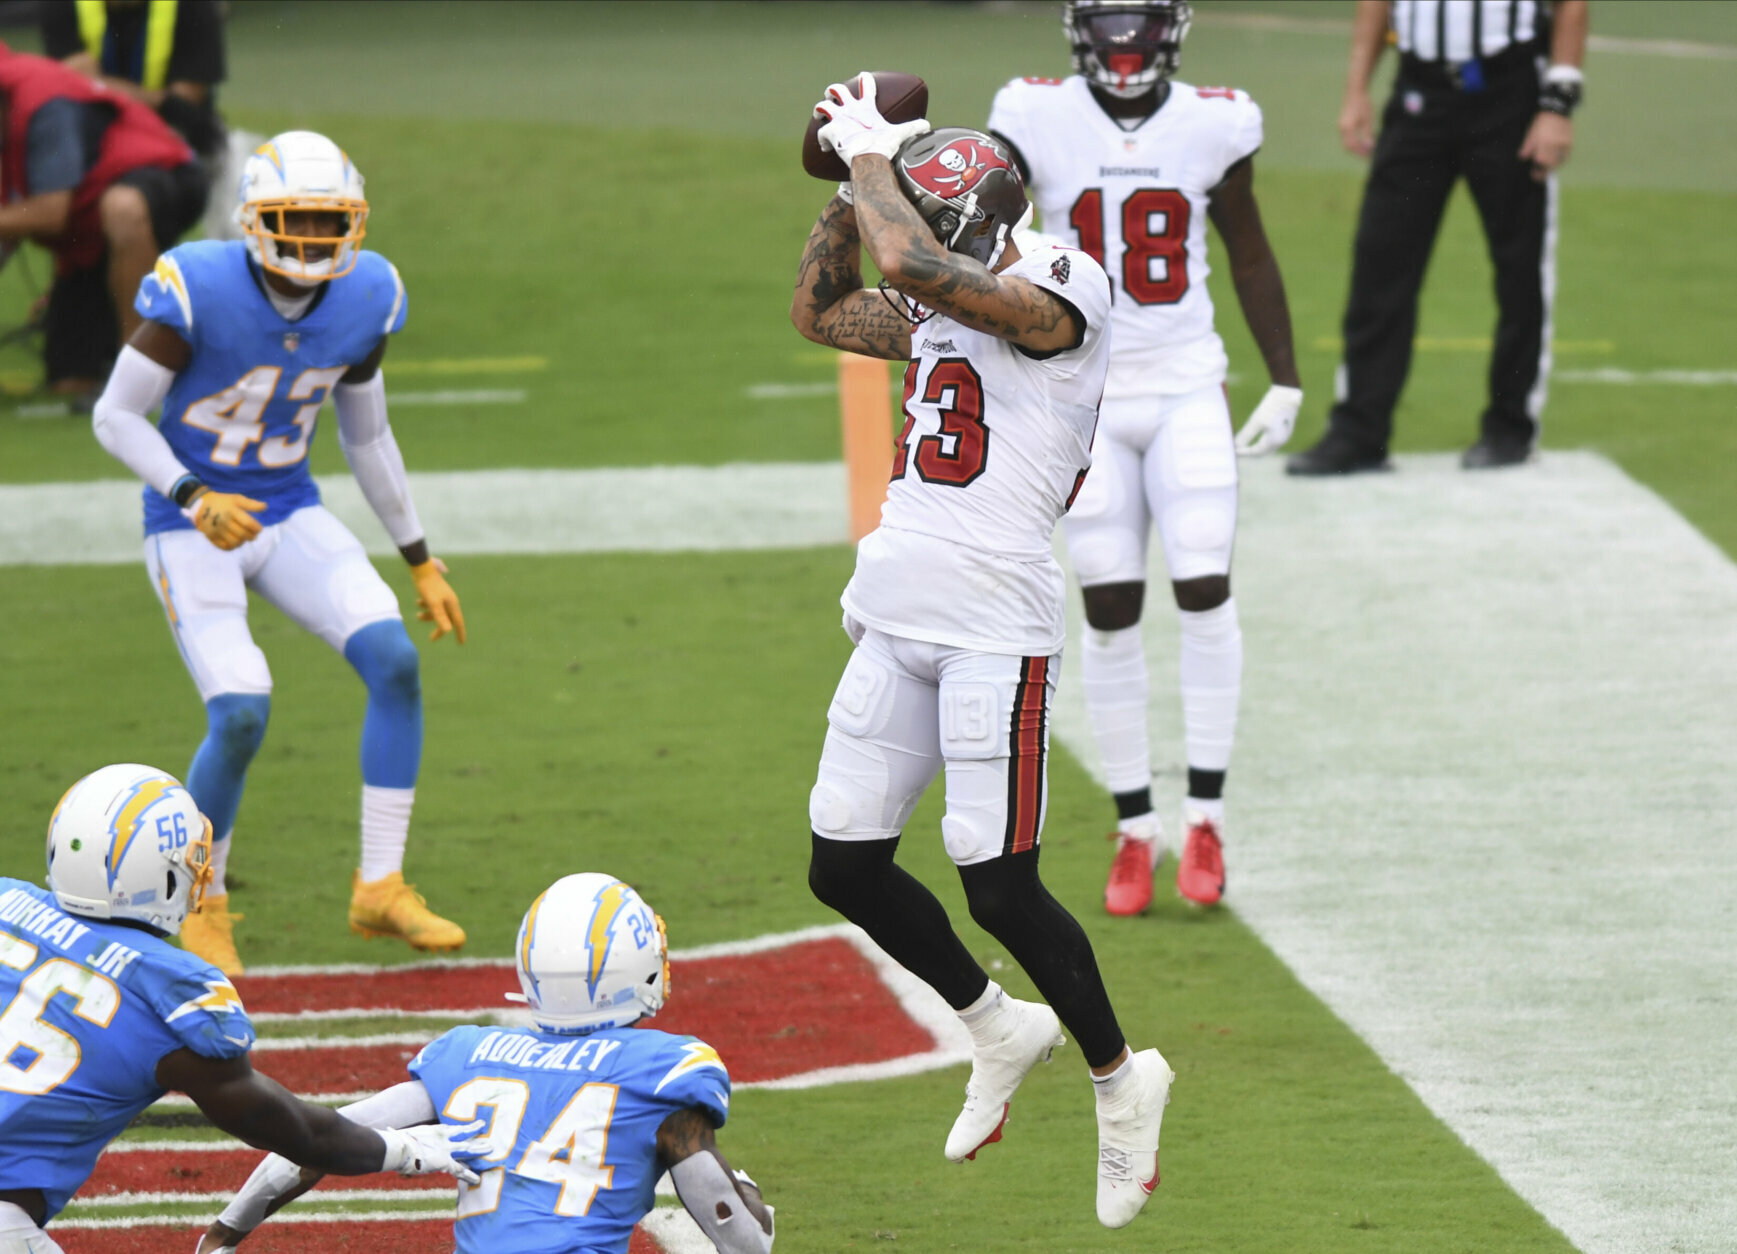 <p><b><i>Chargers 31</i></b><br />
<b><i>Bucs 38</i></b></p>
<p><a href="https://www.tampabay.com/sports/bucs/2020/09/30/mike-evans-downplays-war-of-words-with-keenan-allen-as-chargers-come-to-town/">Mike Evans moonwalked off criticizing Keenan Allen</a> and then moonwalked into the end zone for one of Tom Brady&#8217;s five touchdown passes, helping TB become the oldest player to have a five-TD game. But will the GOAT&#8217;s 43-year-old arm have enough juice to play a Thursday night game in Chicago?</p>
